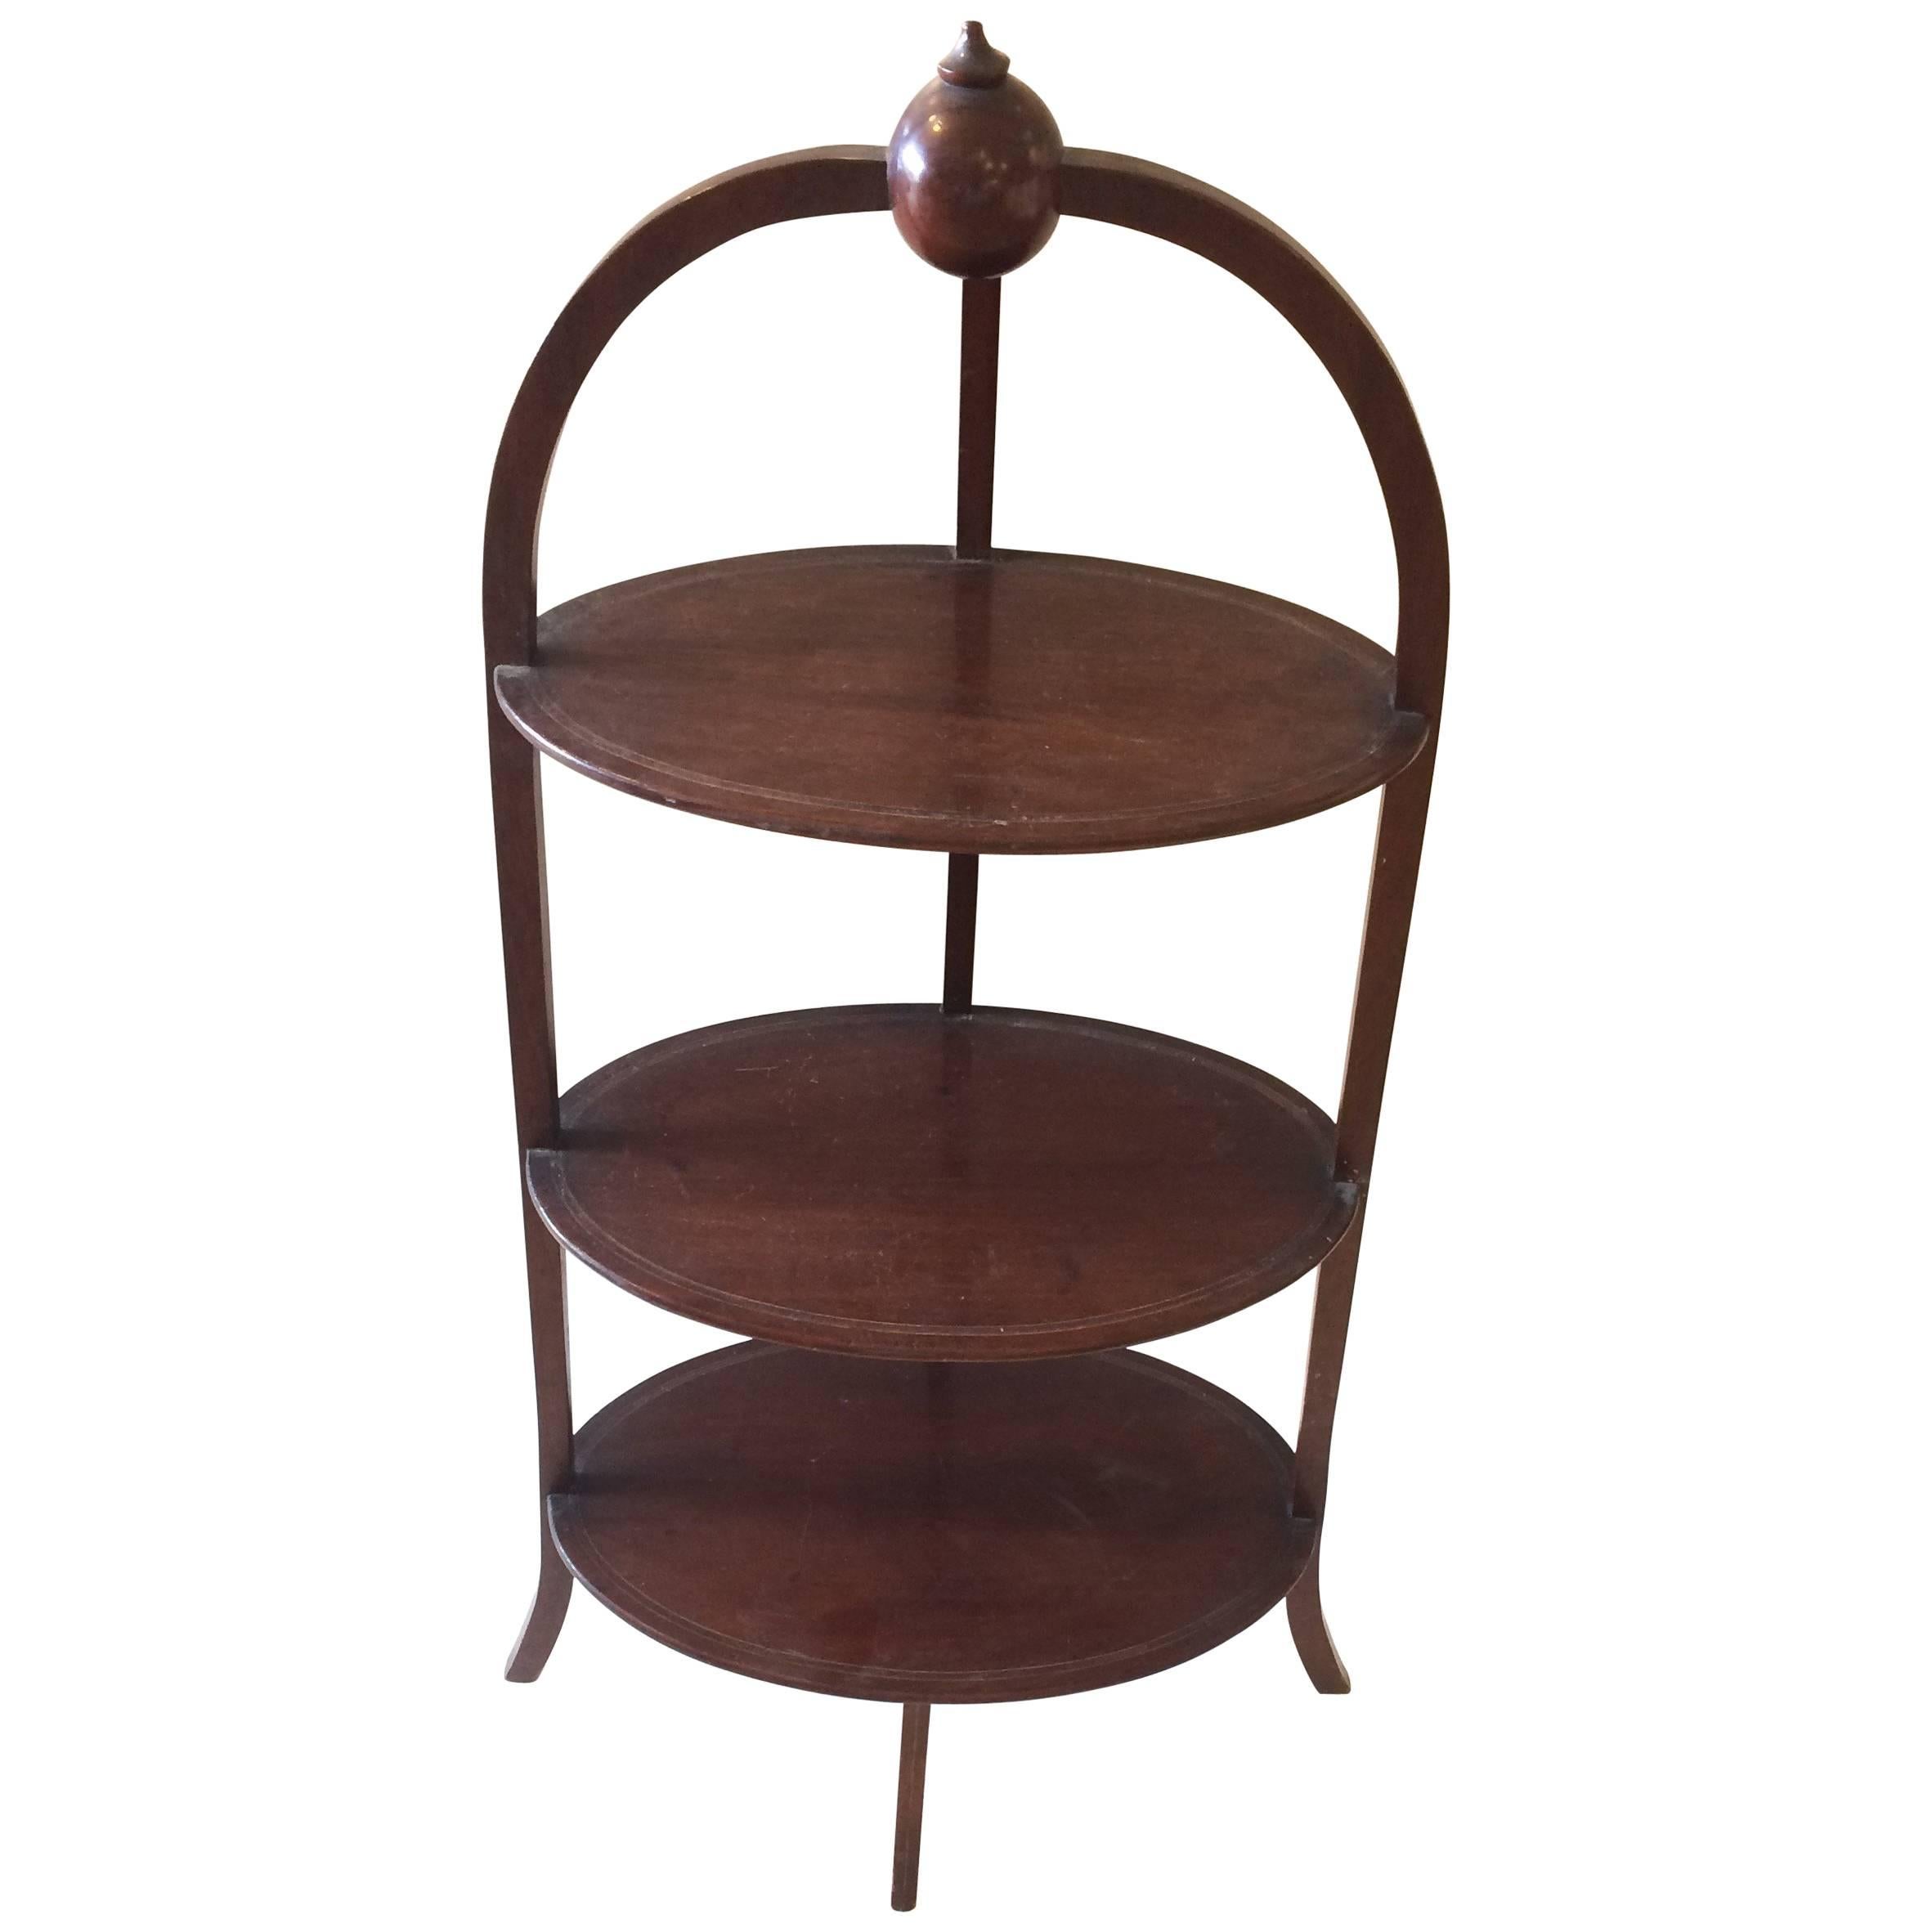 Rare 19th Century English Oval Three-Tier Side Table Muffin Stand